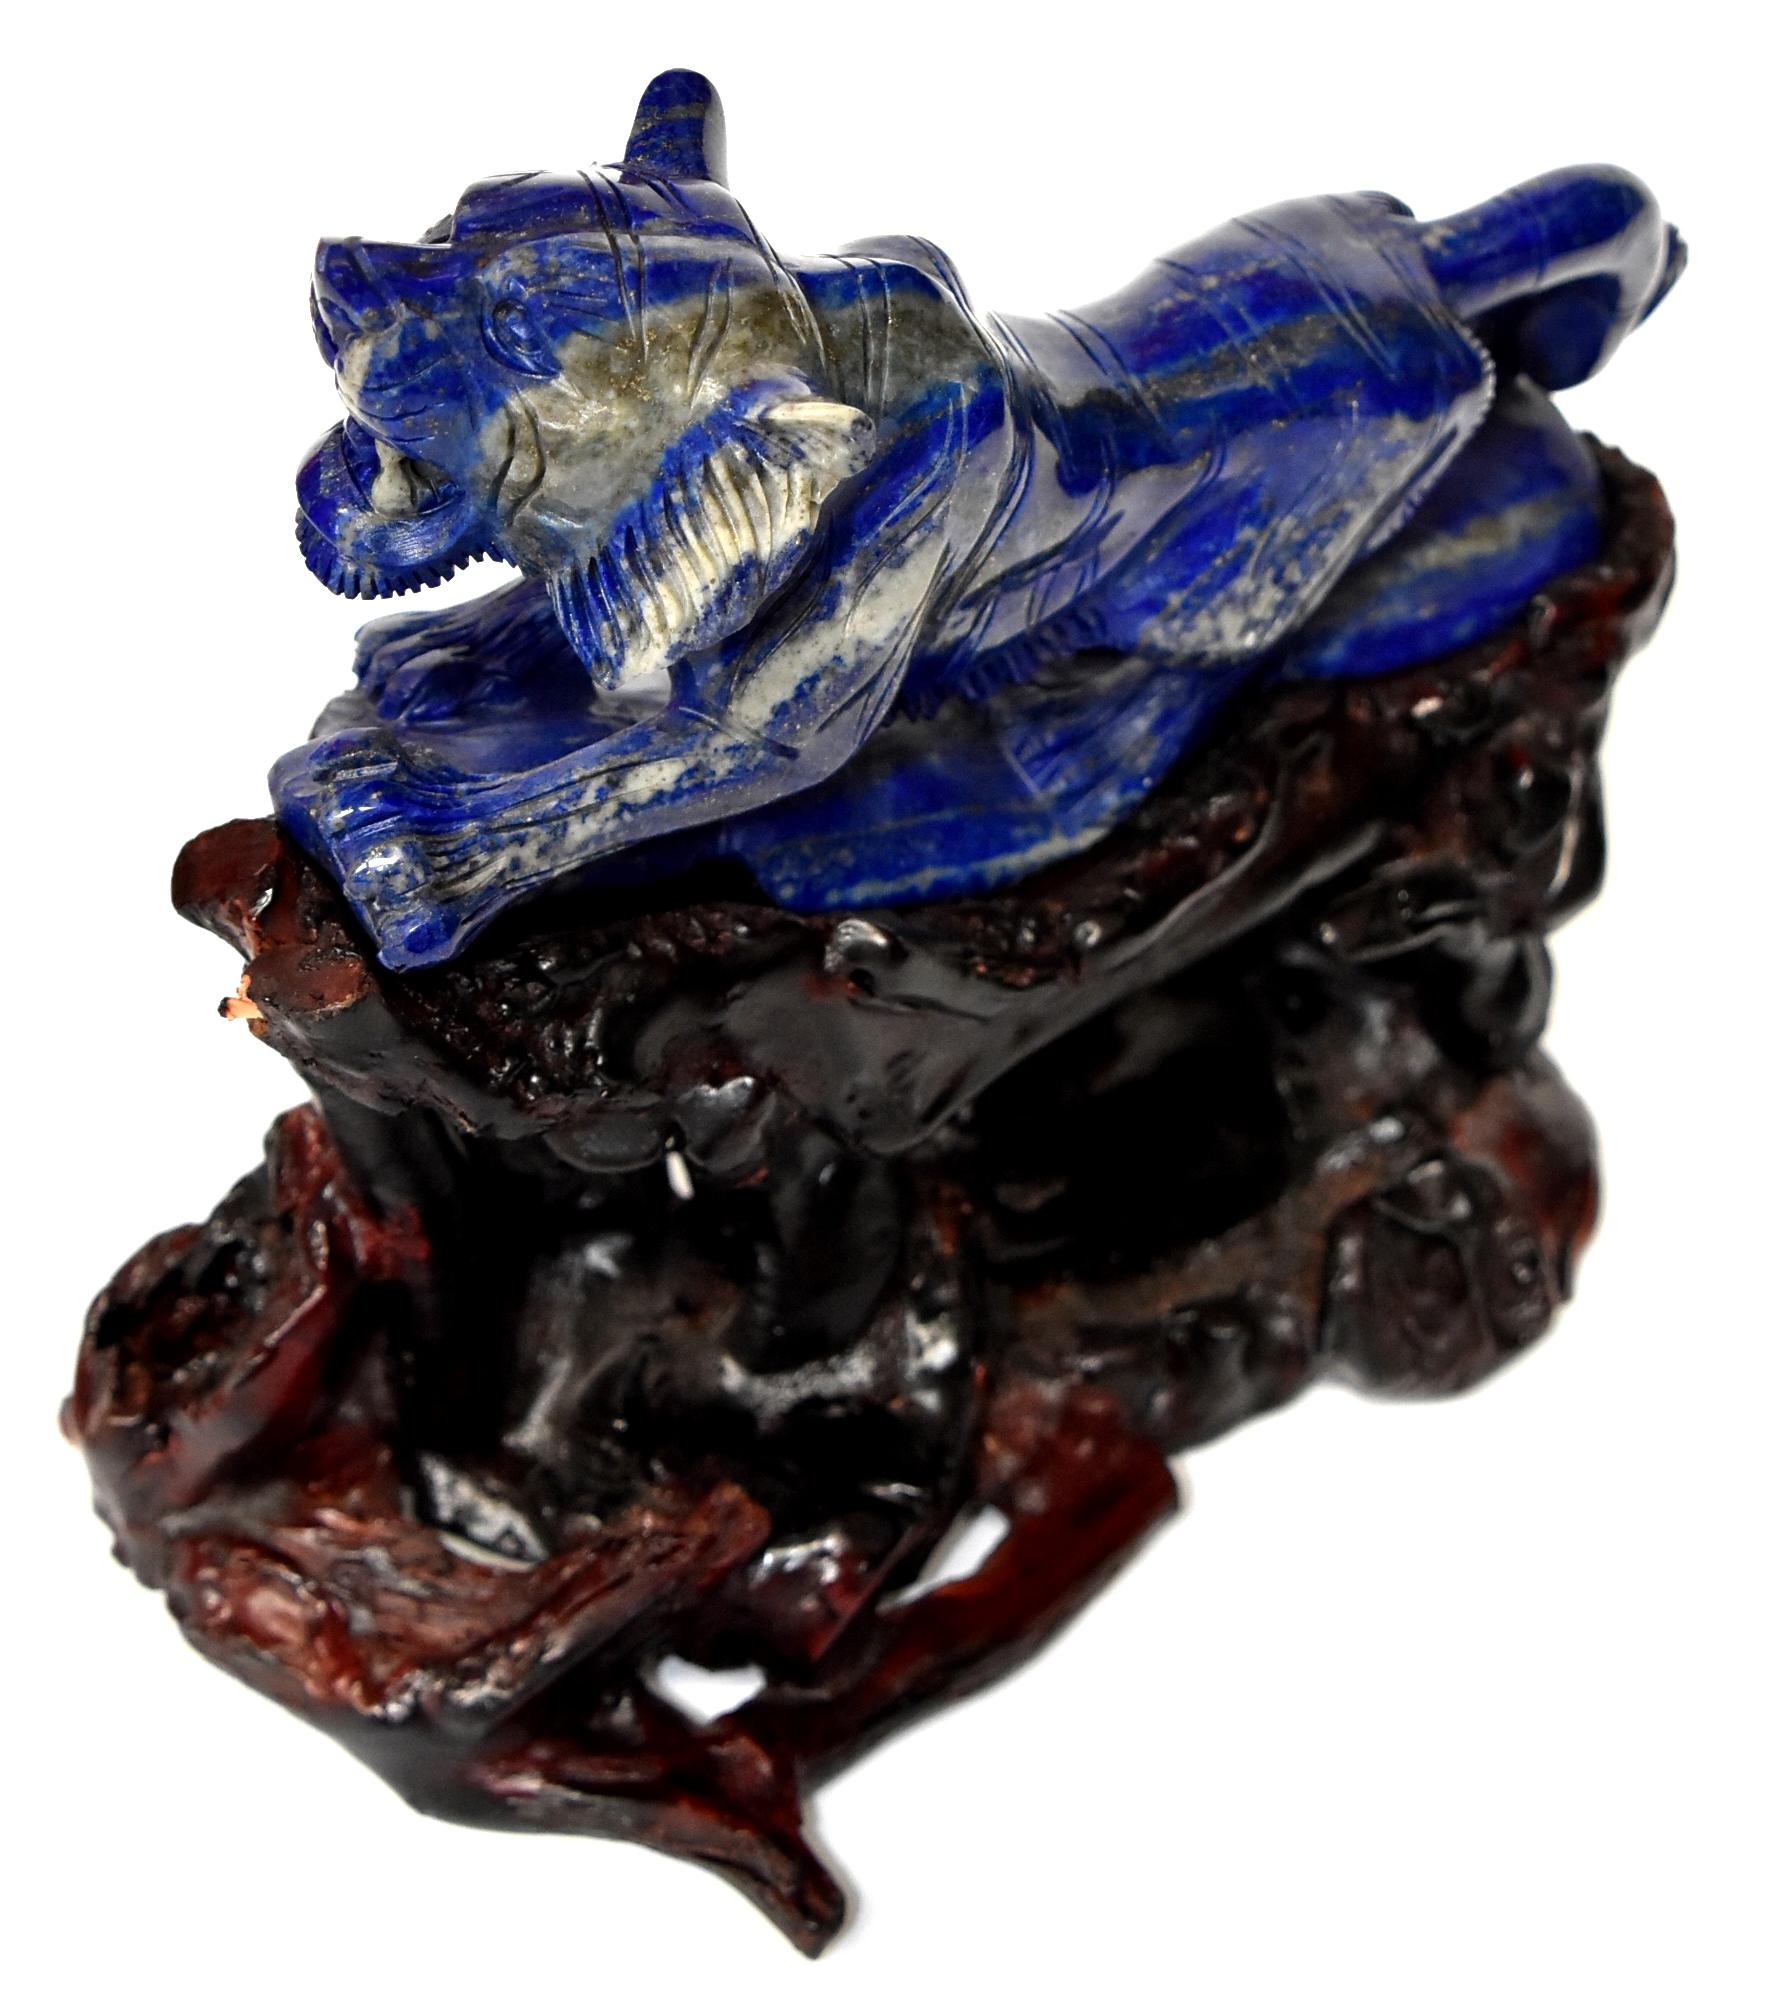 Hand-Carved Lapis Lazuli Tiger Sculpture Statue, 2 lb Natural with White Tooth